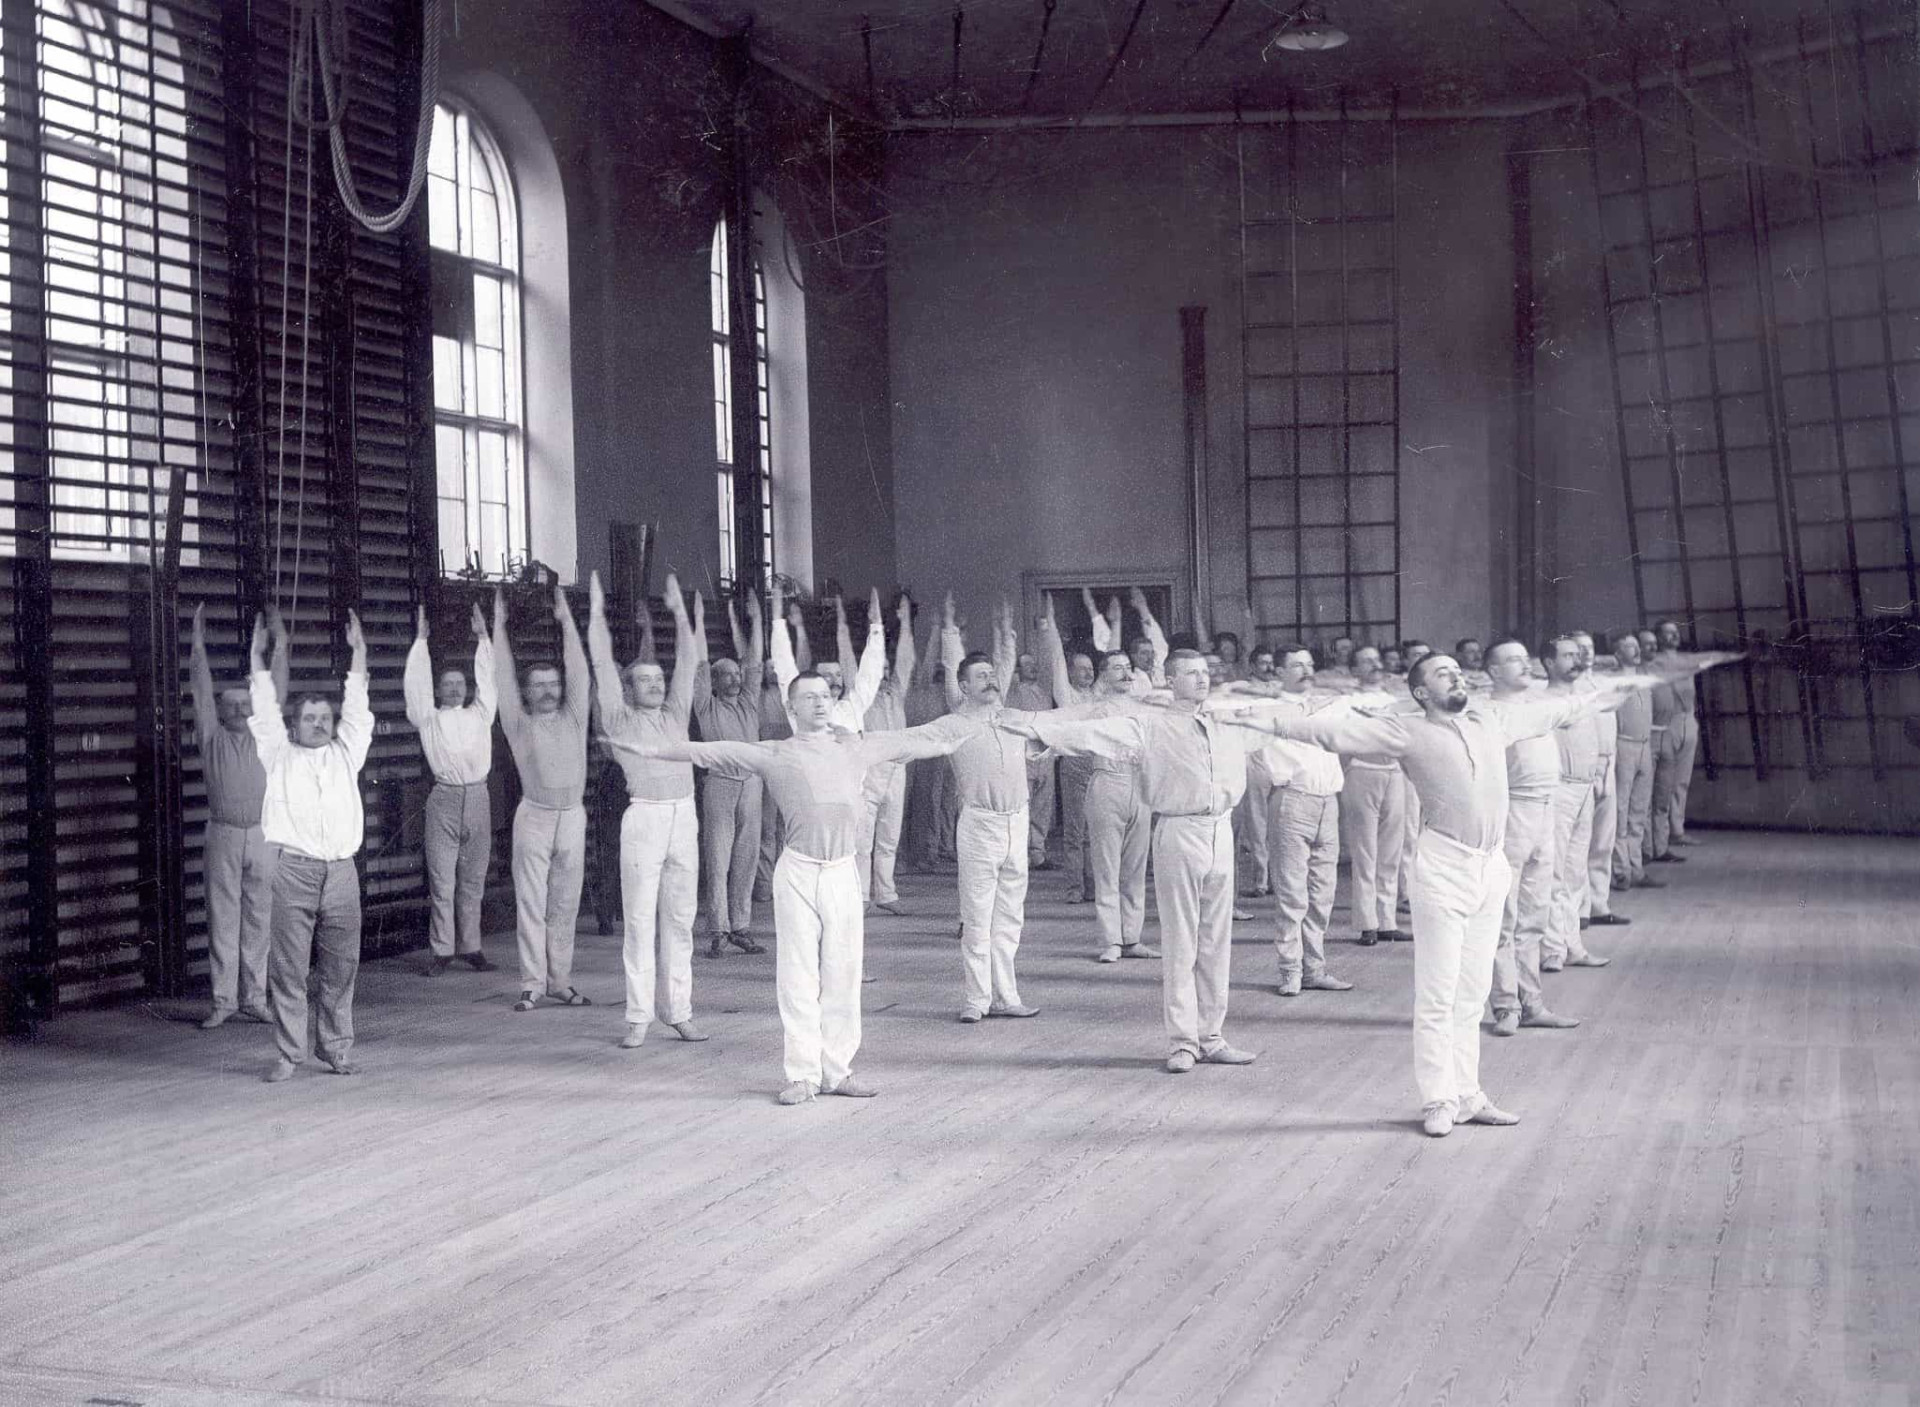 <p>In the early 1800s, Pehr Henrik Ling created a new gymnastics system, which was eventually adopted by Swedish troops.</p>